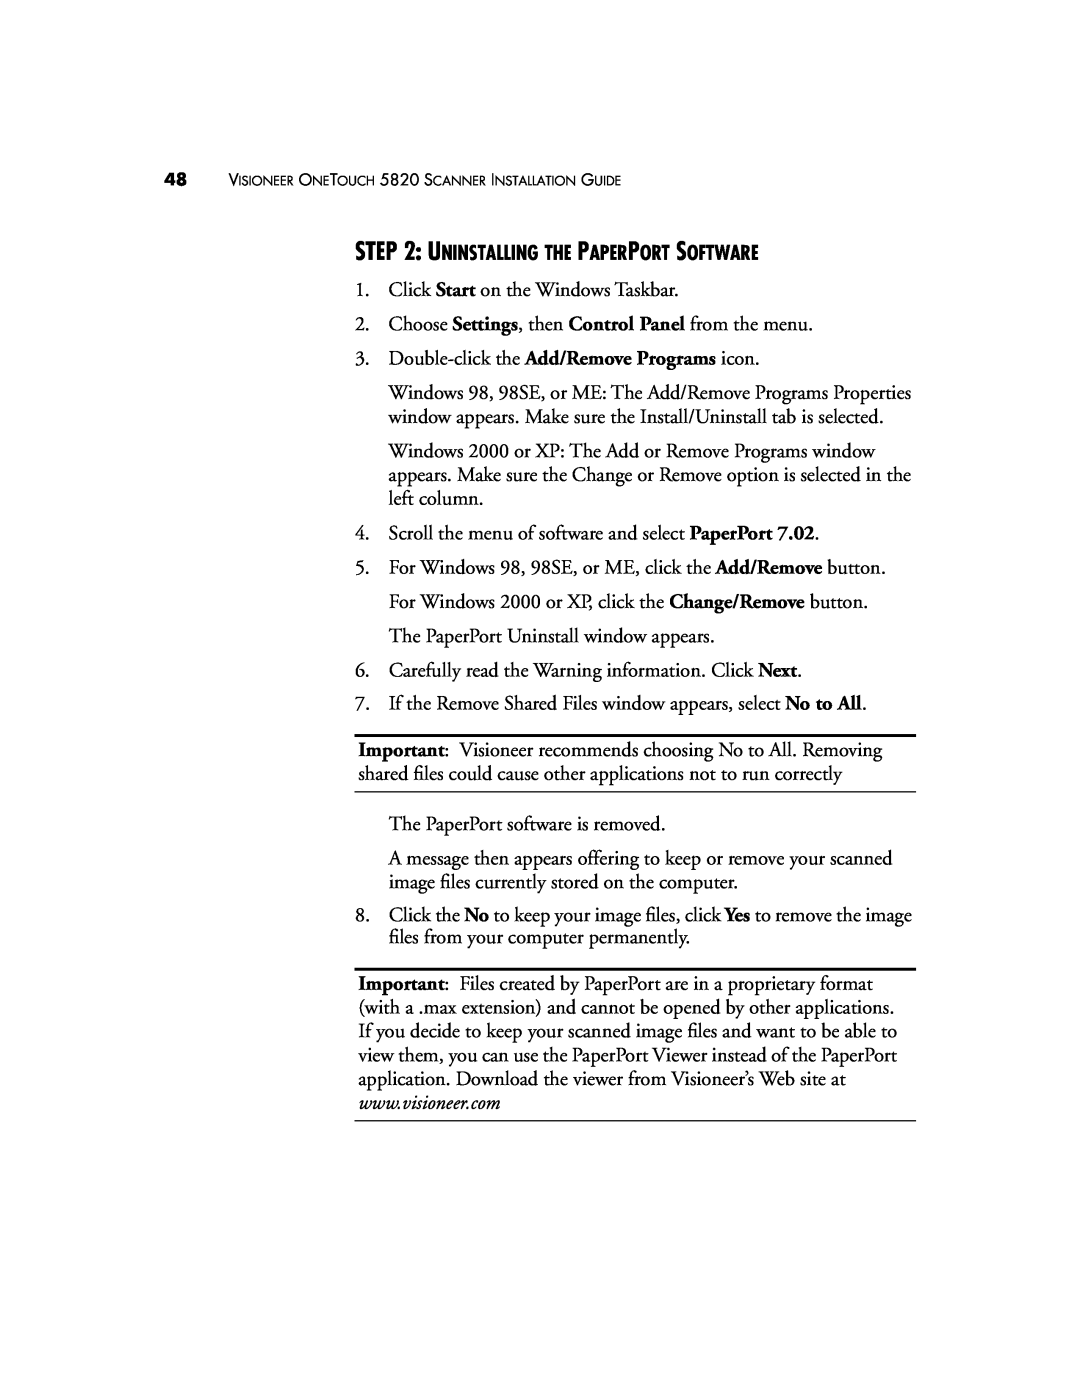 Visioneer manual Uninstalling The Paperport Software, VISIONEER ONETOUCH 5820 SCANNER INSTALLATION GUIDE 